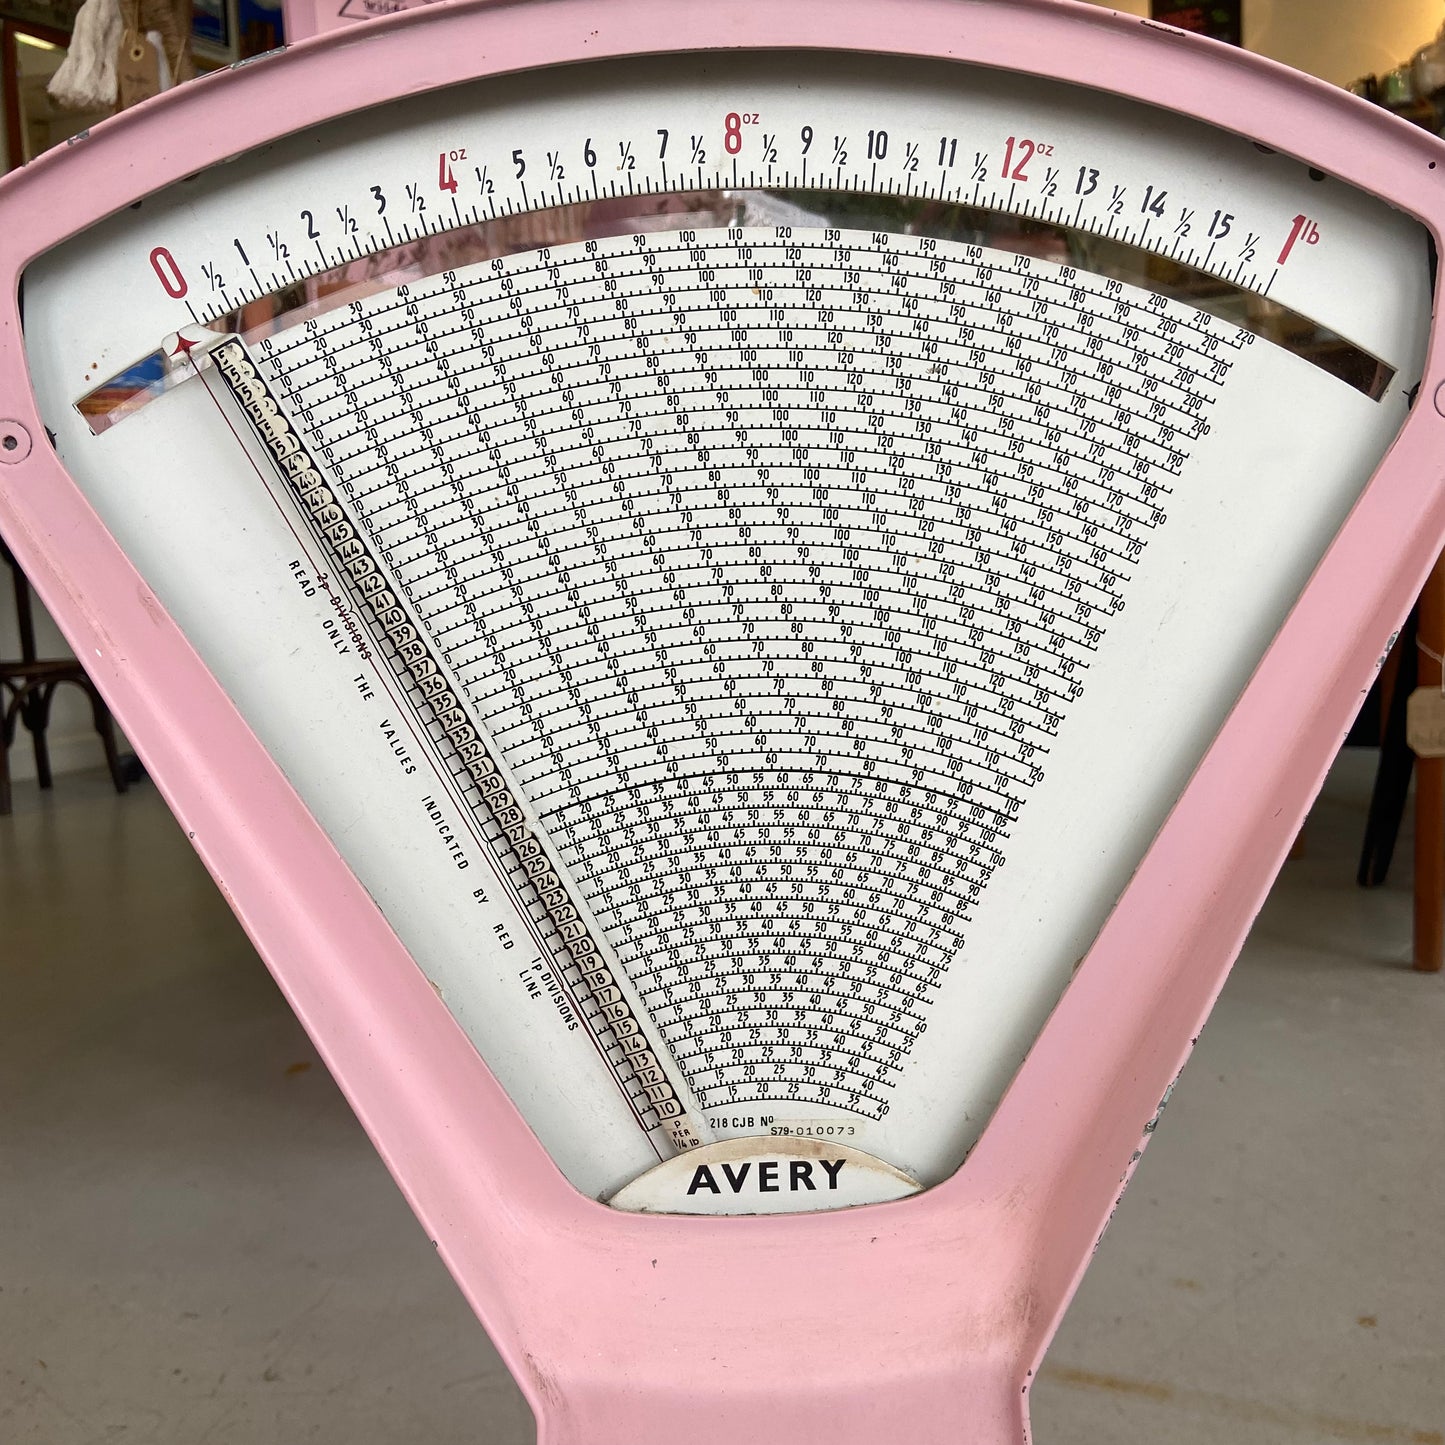 Vintage Avery Pink Sweet Shop Scales